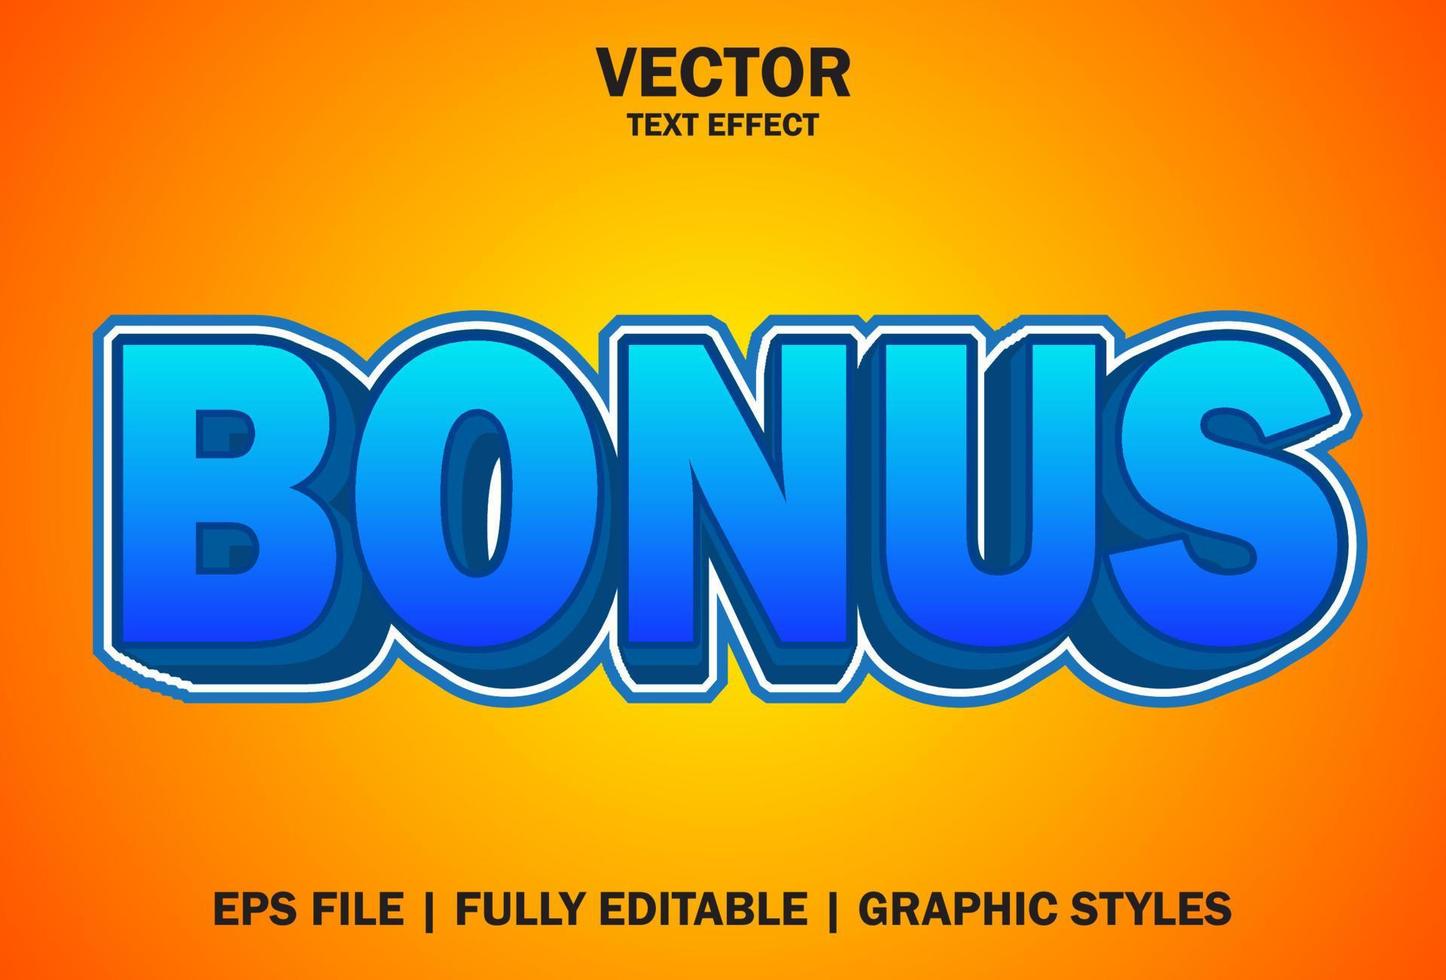 bonus text effect with orange and blue color editable. vector